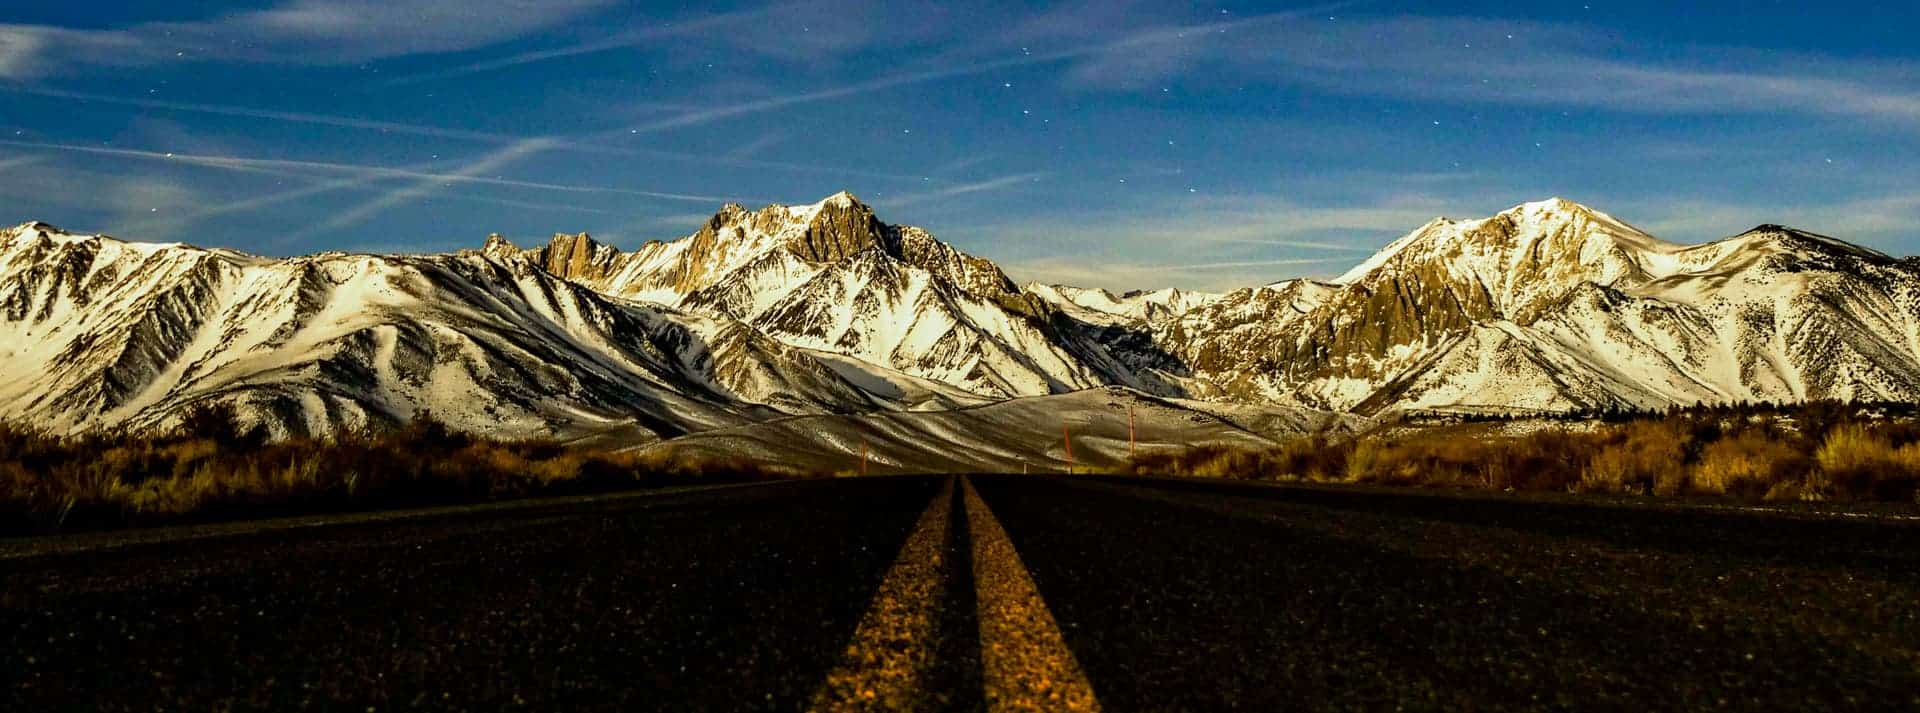 Bucket List Road Trips San Francisco to Mammoth Lakes - Intrepid Escape